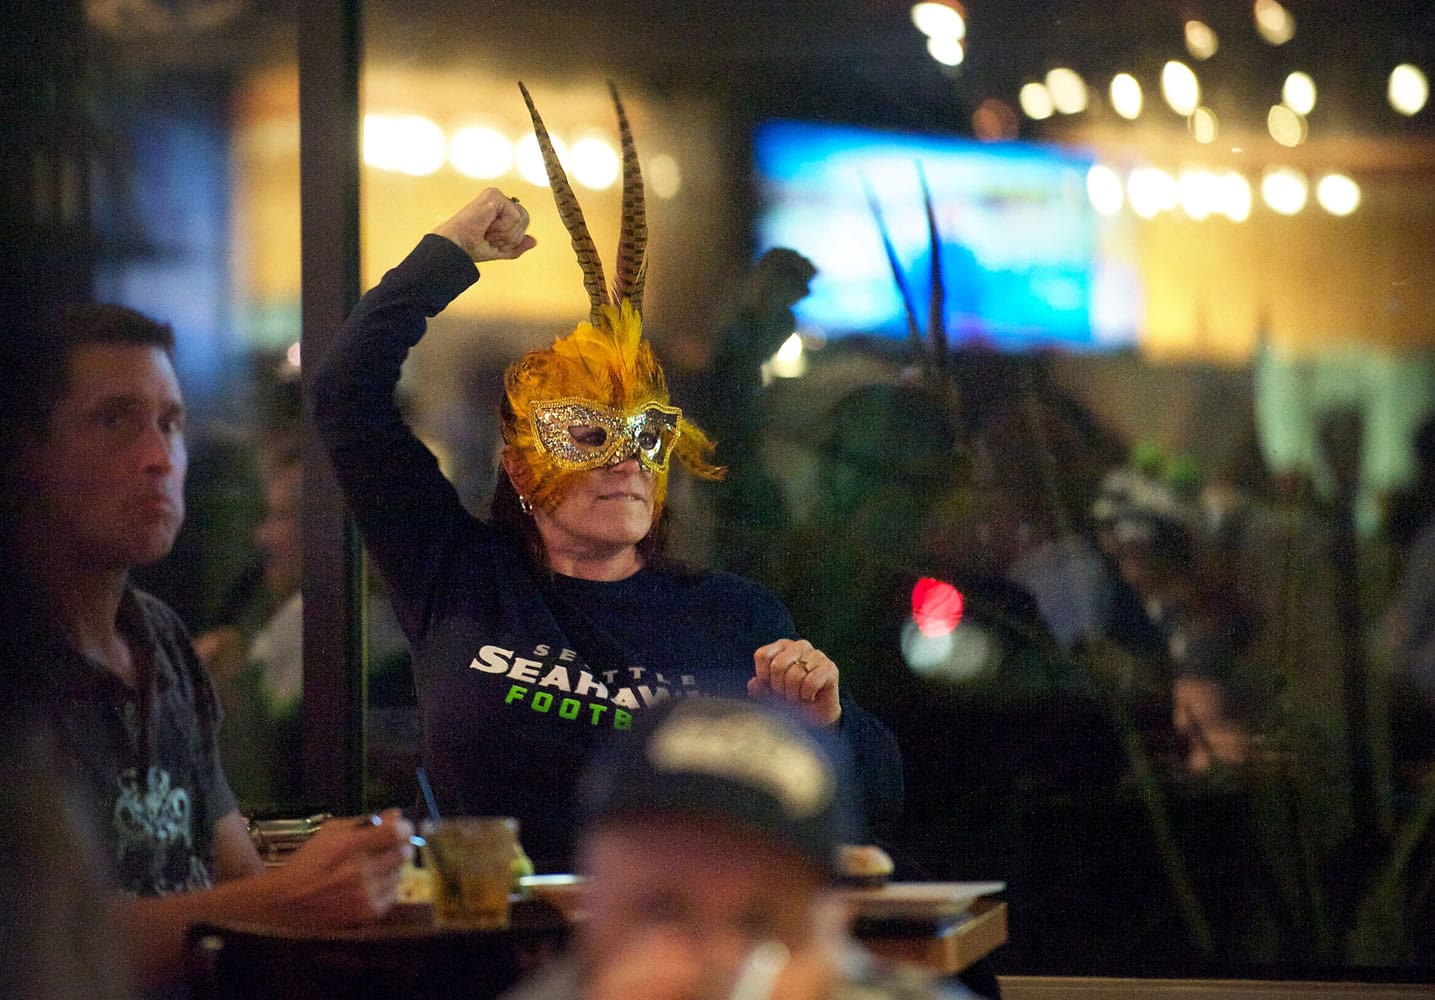 Seahawks stalwart Valerie Vance of Vancouver pumps her fist in the air during a rally at Main Event Sports Grill on Southeast 164th Avenue on Friday during an officially sponsored NFL team event. The rally was one of 12 around the state held in advance of today's playoff game vs. the New Orleans Saints.